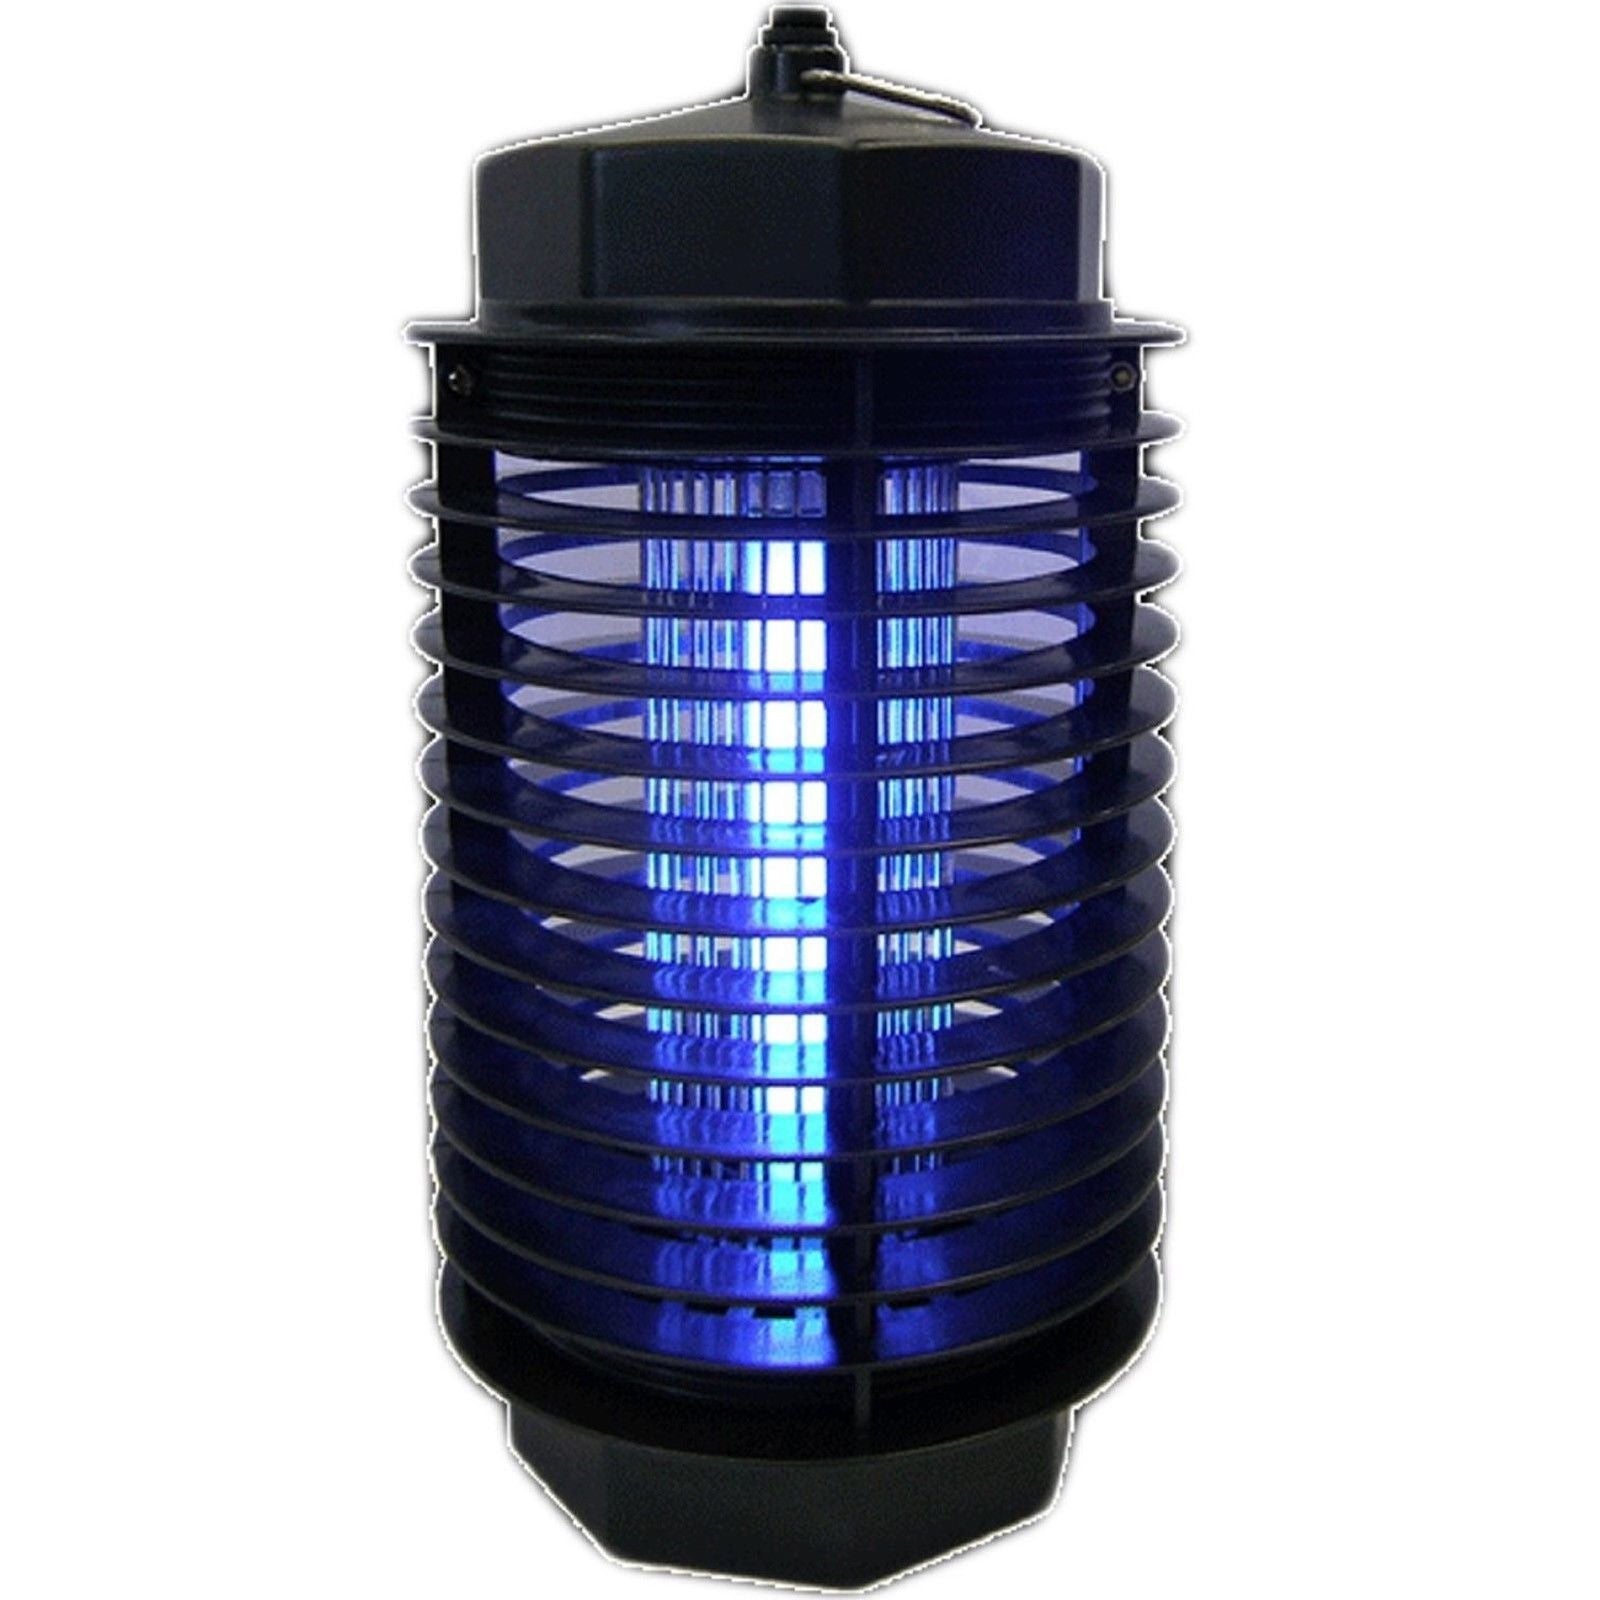 Bug Zapper Mosquito Insect Killer Lamp Electric Pest Wasp Fly